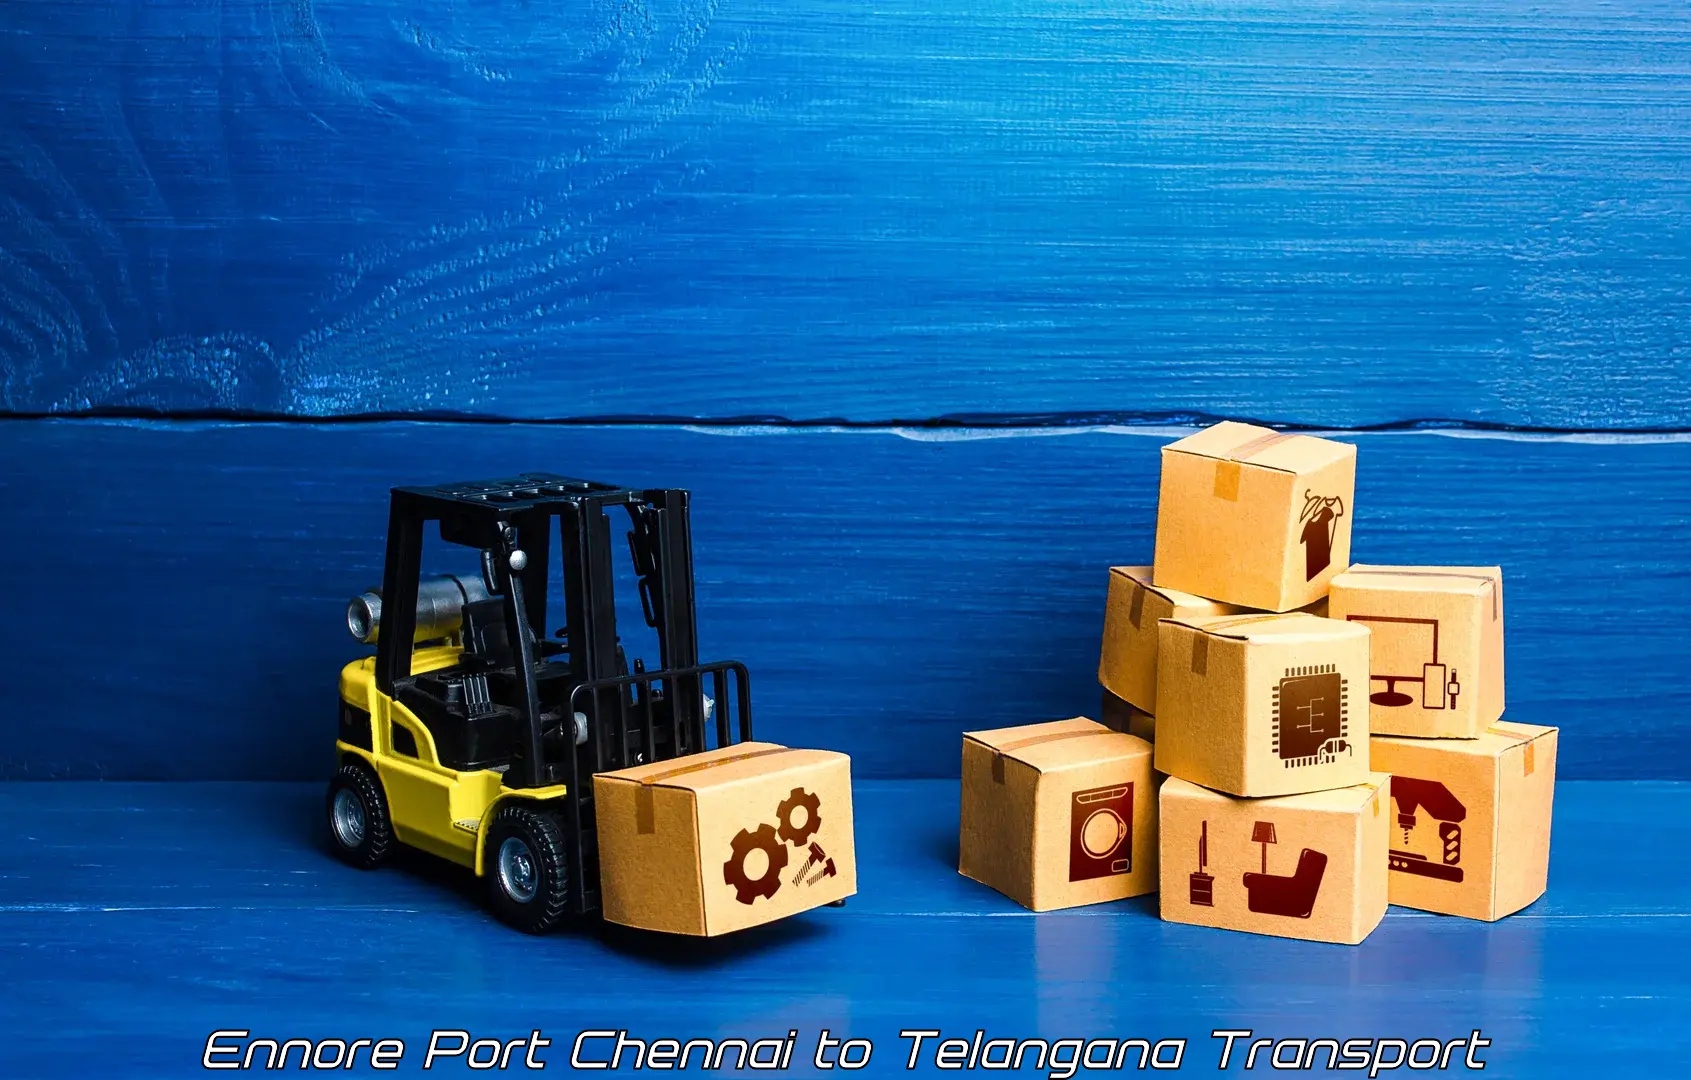 Container transport service Ennore Port Chennai to Jannaram